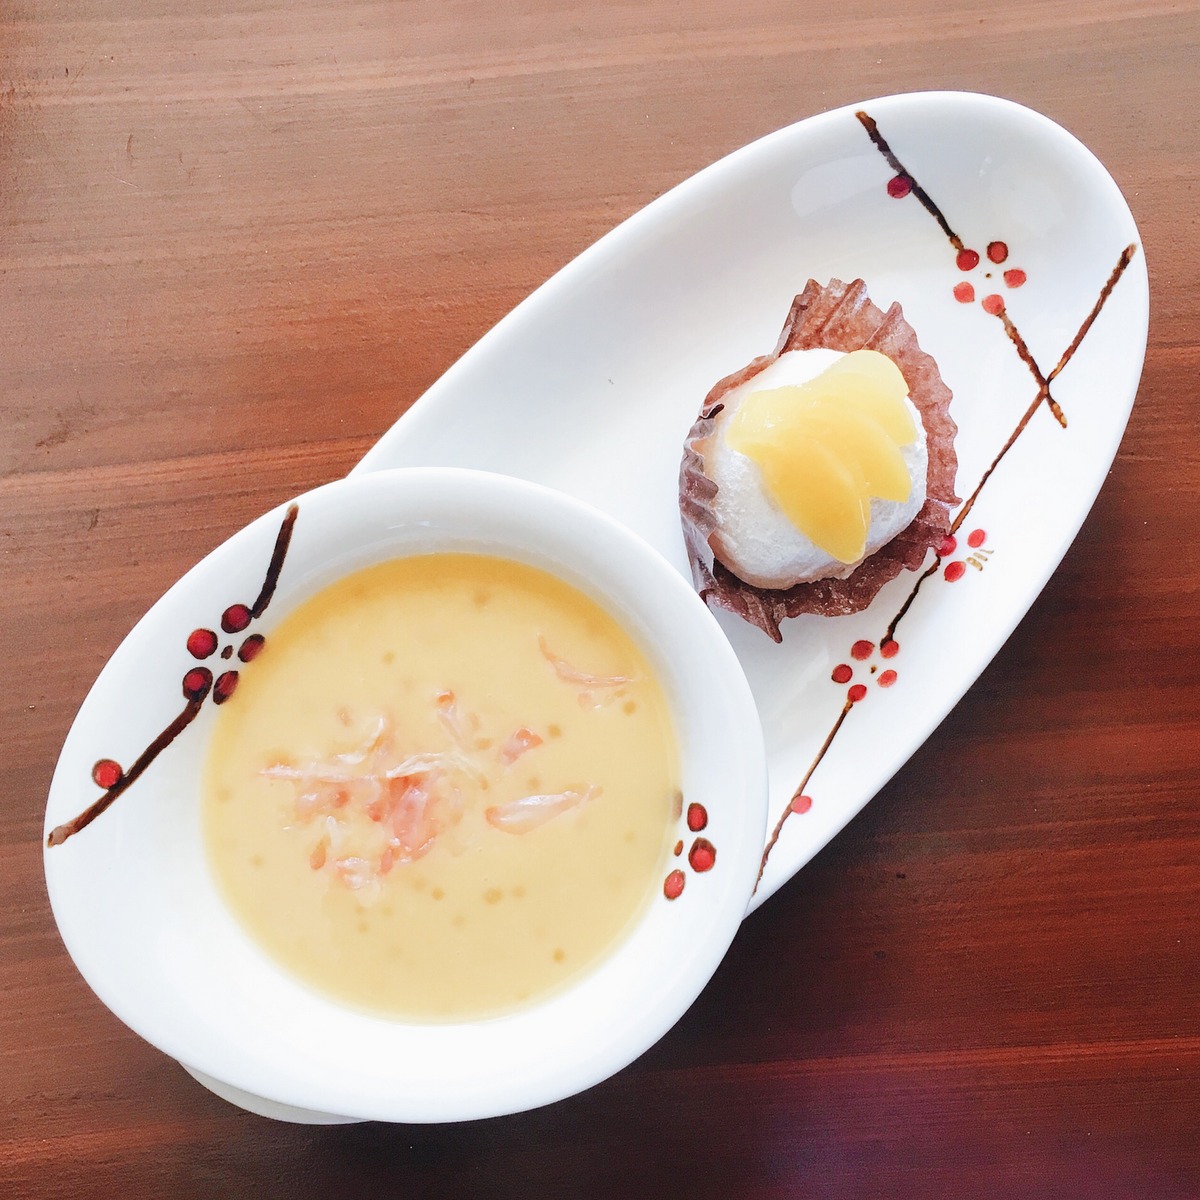 Chilled Glutinous Rice with Creamy Mango Filling and Chilled Mango Puree with Pomelo and Sago